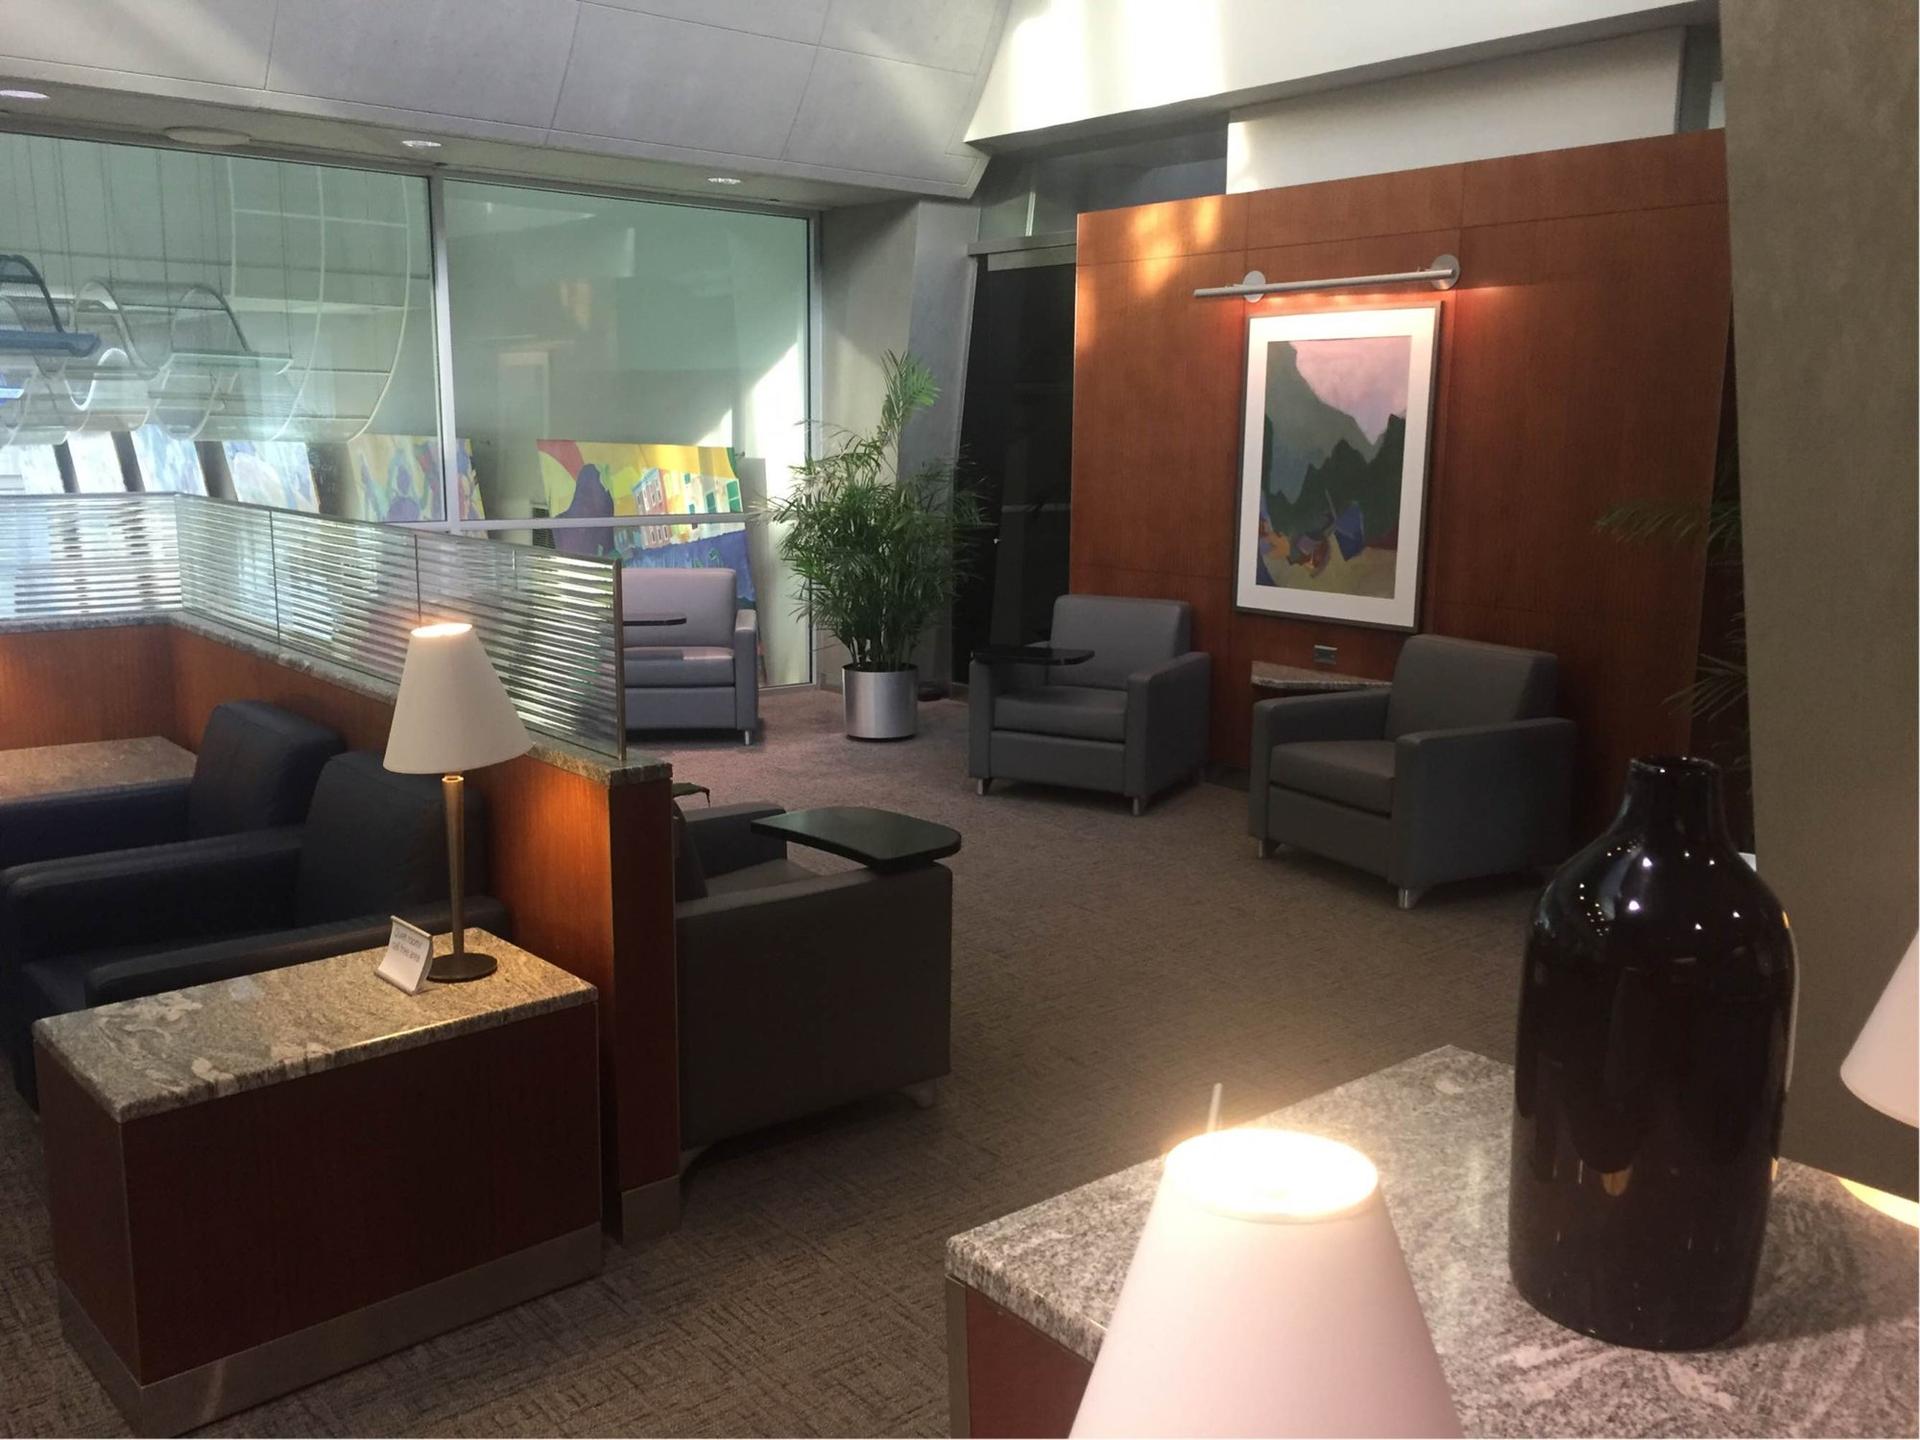 American Airlines Admirals Club image 41 of 48